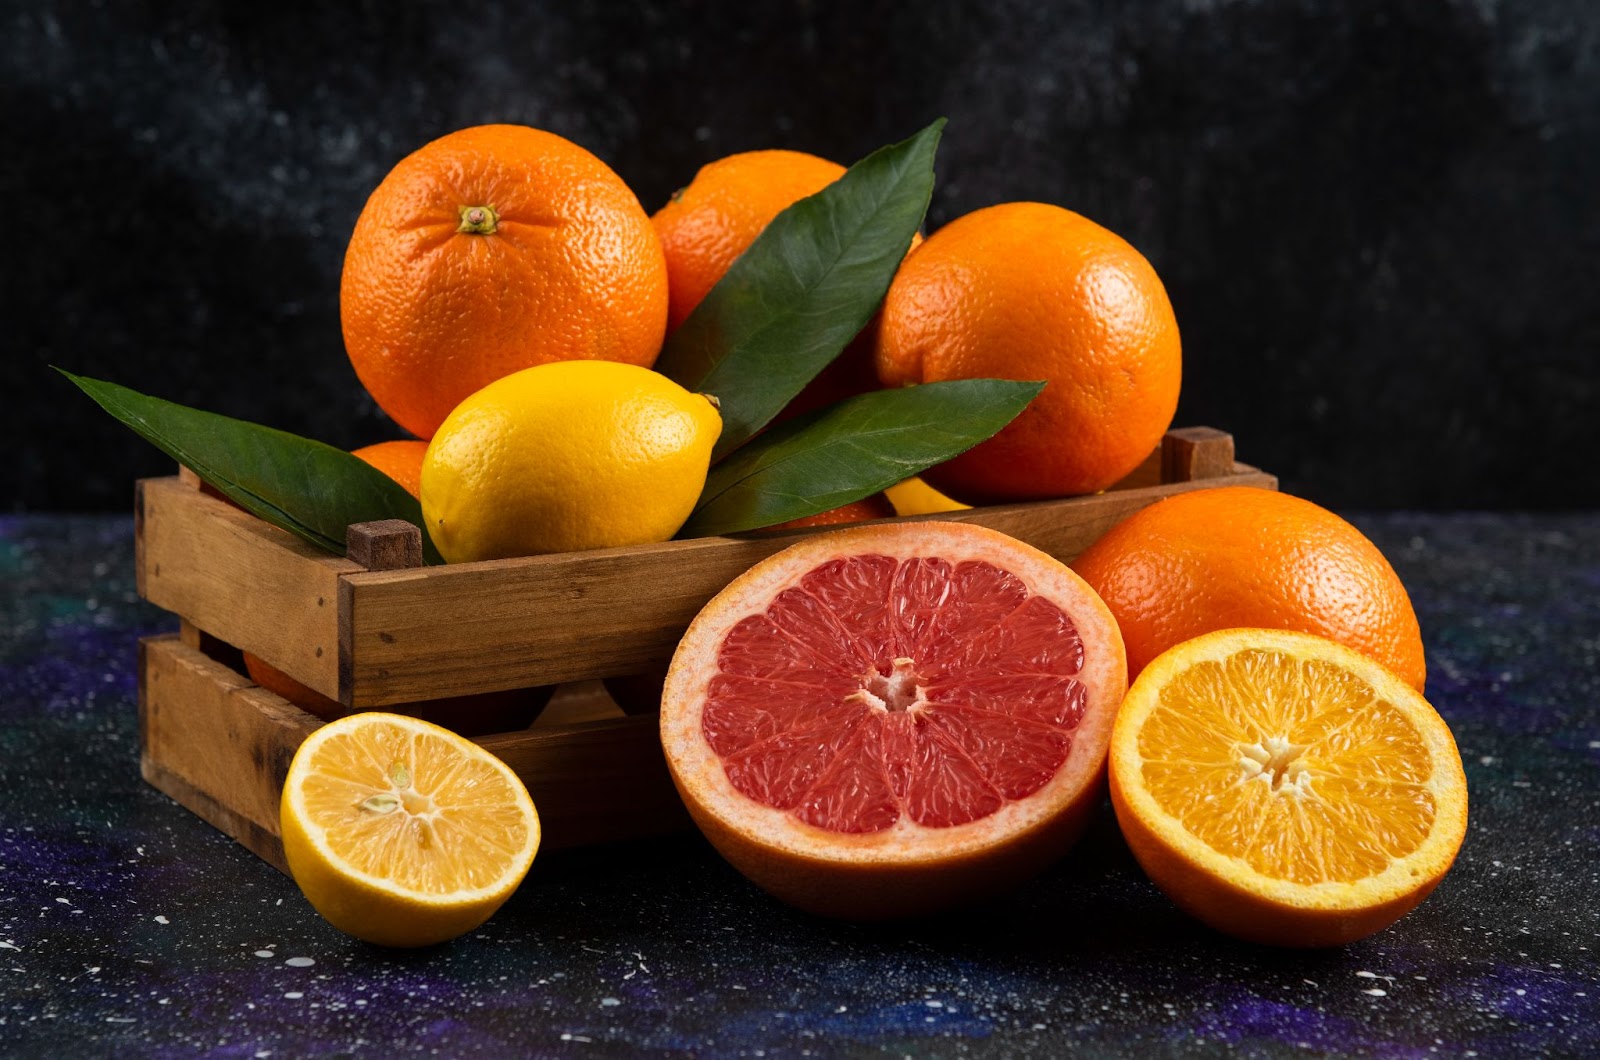 Limonene is claimed to have anti-cancer and anti-anxiety properties